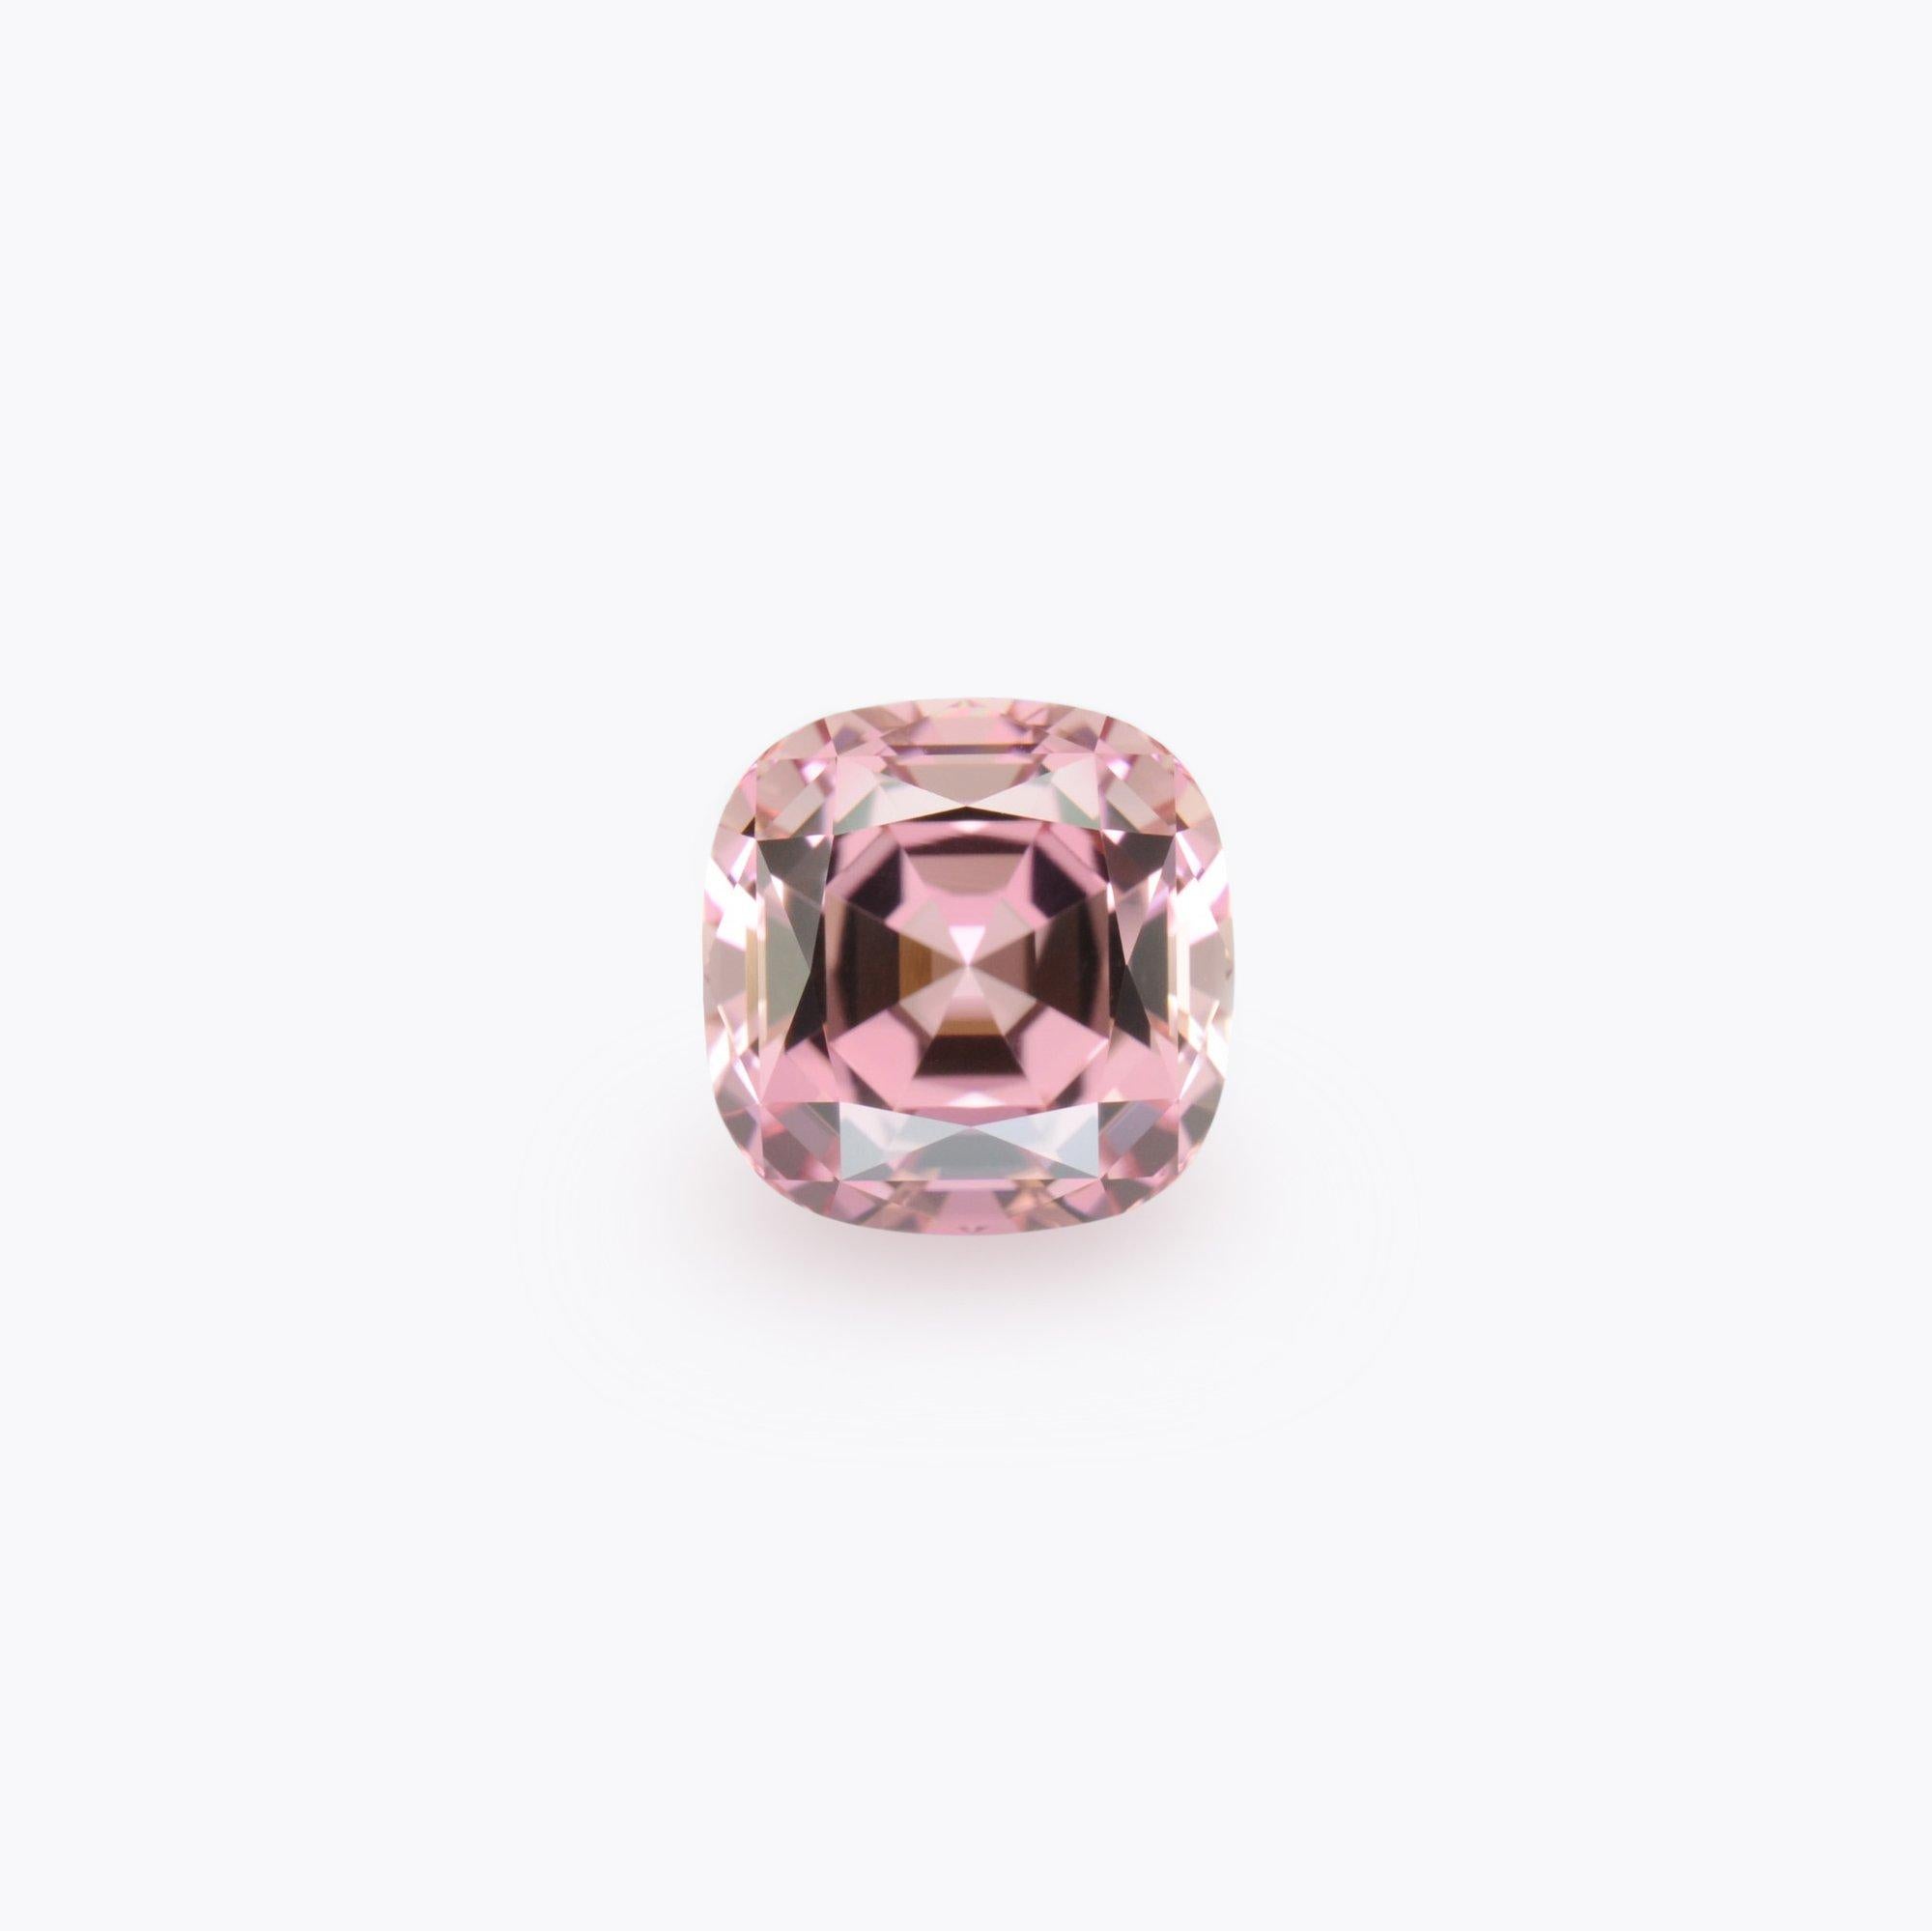 Exquisite 7.82 carat Pink Tourmaline cushion cut gem offered loose to a classy lady.
Returns are accepted and paid by us within 7 days of delivery.
We offer supreme custom jewelry work upon request. Please contact us for more details.
For your